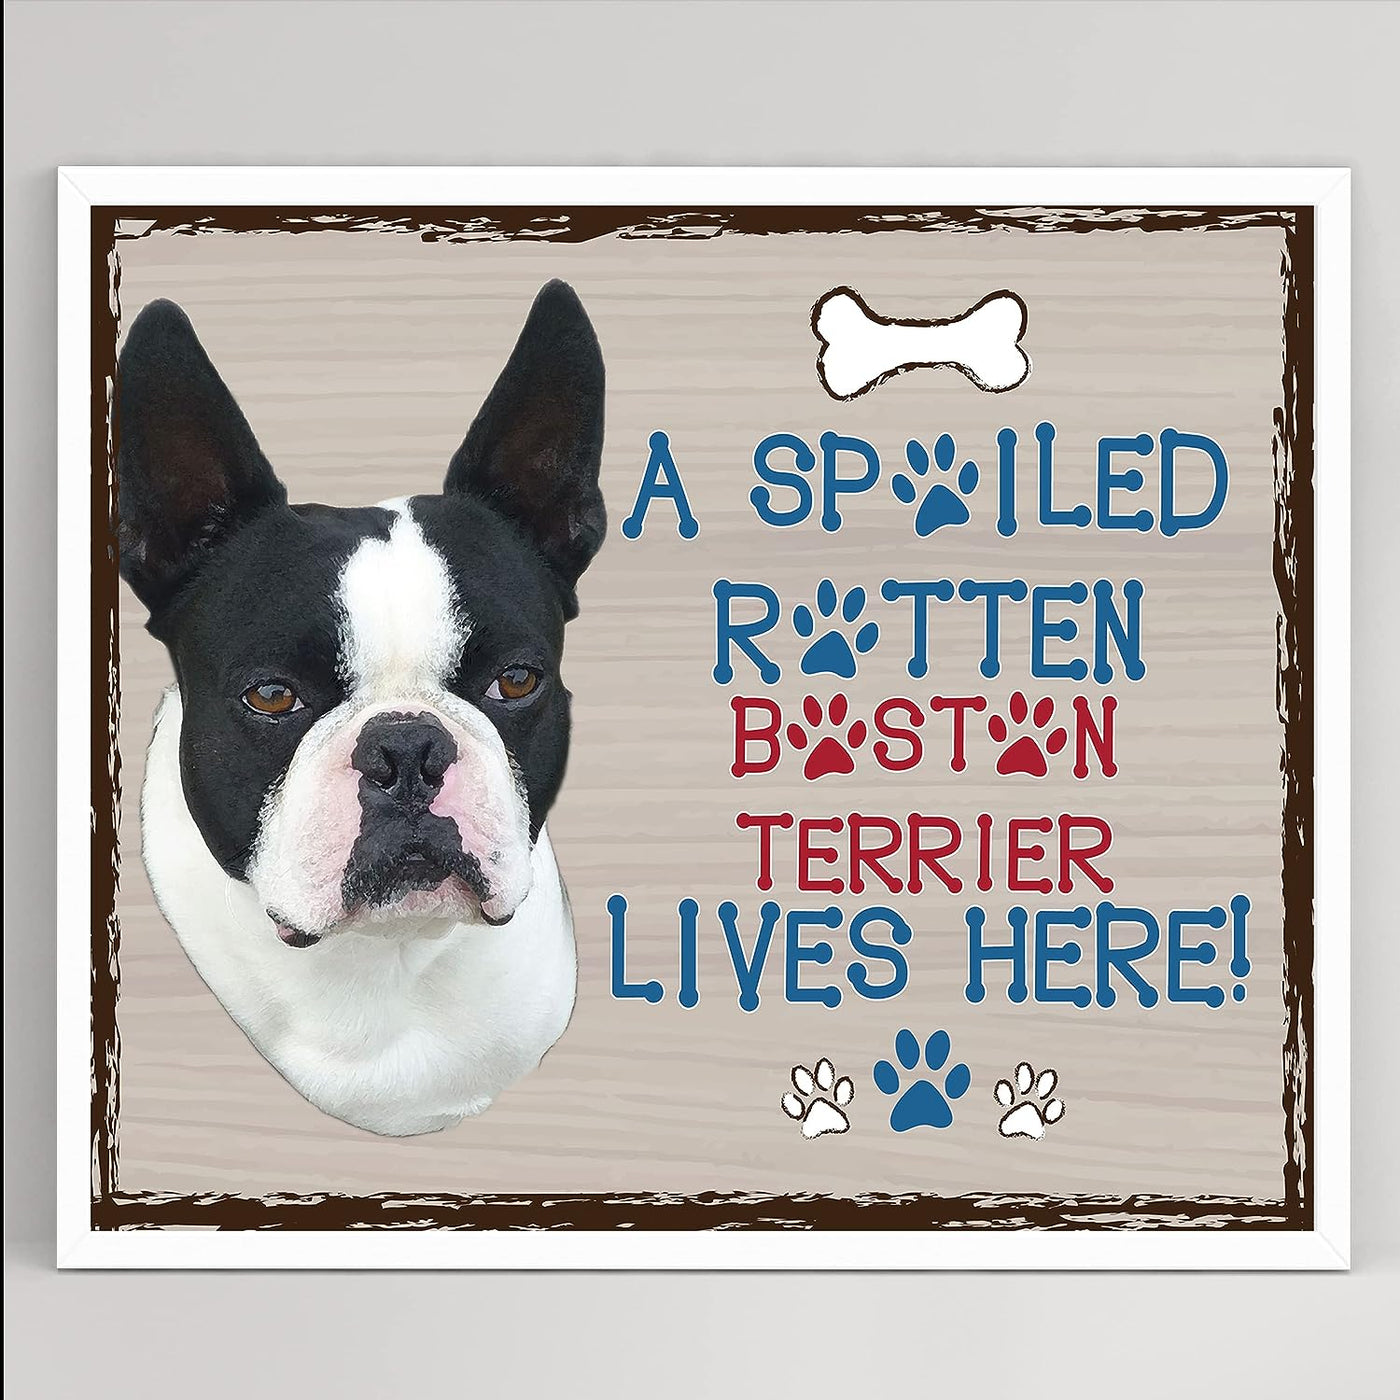 Boston Terrier-Dog Poster Print-10 x 8" Wall Decor Sign-Ready To Frame."A Spoiled Rotten Boston Terrier Lives Here". Perfect Pet Wall Art for Home-Kitchen-Cave-Garage. Great Gift for Terrier Lovers!